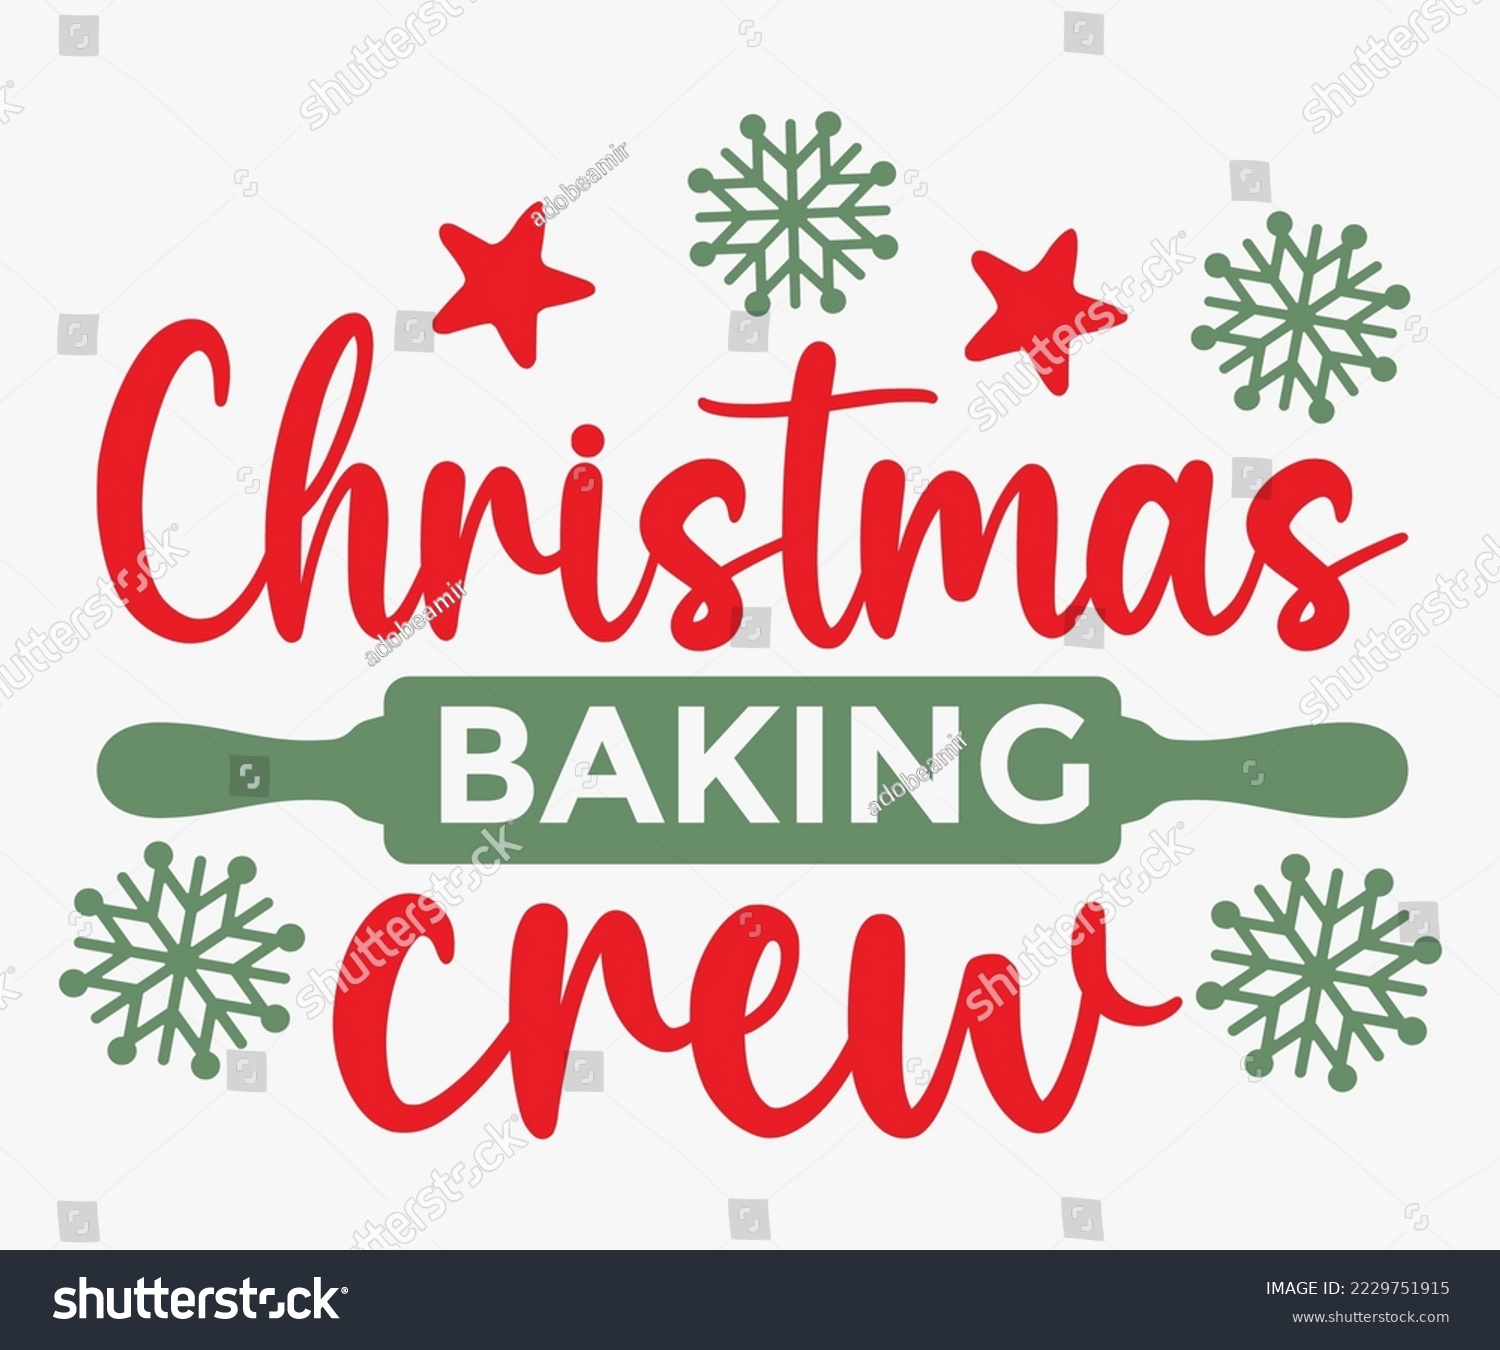 SVG of Christmas Baking Crew SVG, Merry Christmas T-shirts, Funny Christmas Quotes, Winter Quote, Christmas Saying, Holiday SVG T-shirt, Santa Claus Hat, New Year SVG, Snowflakes Files svg